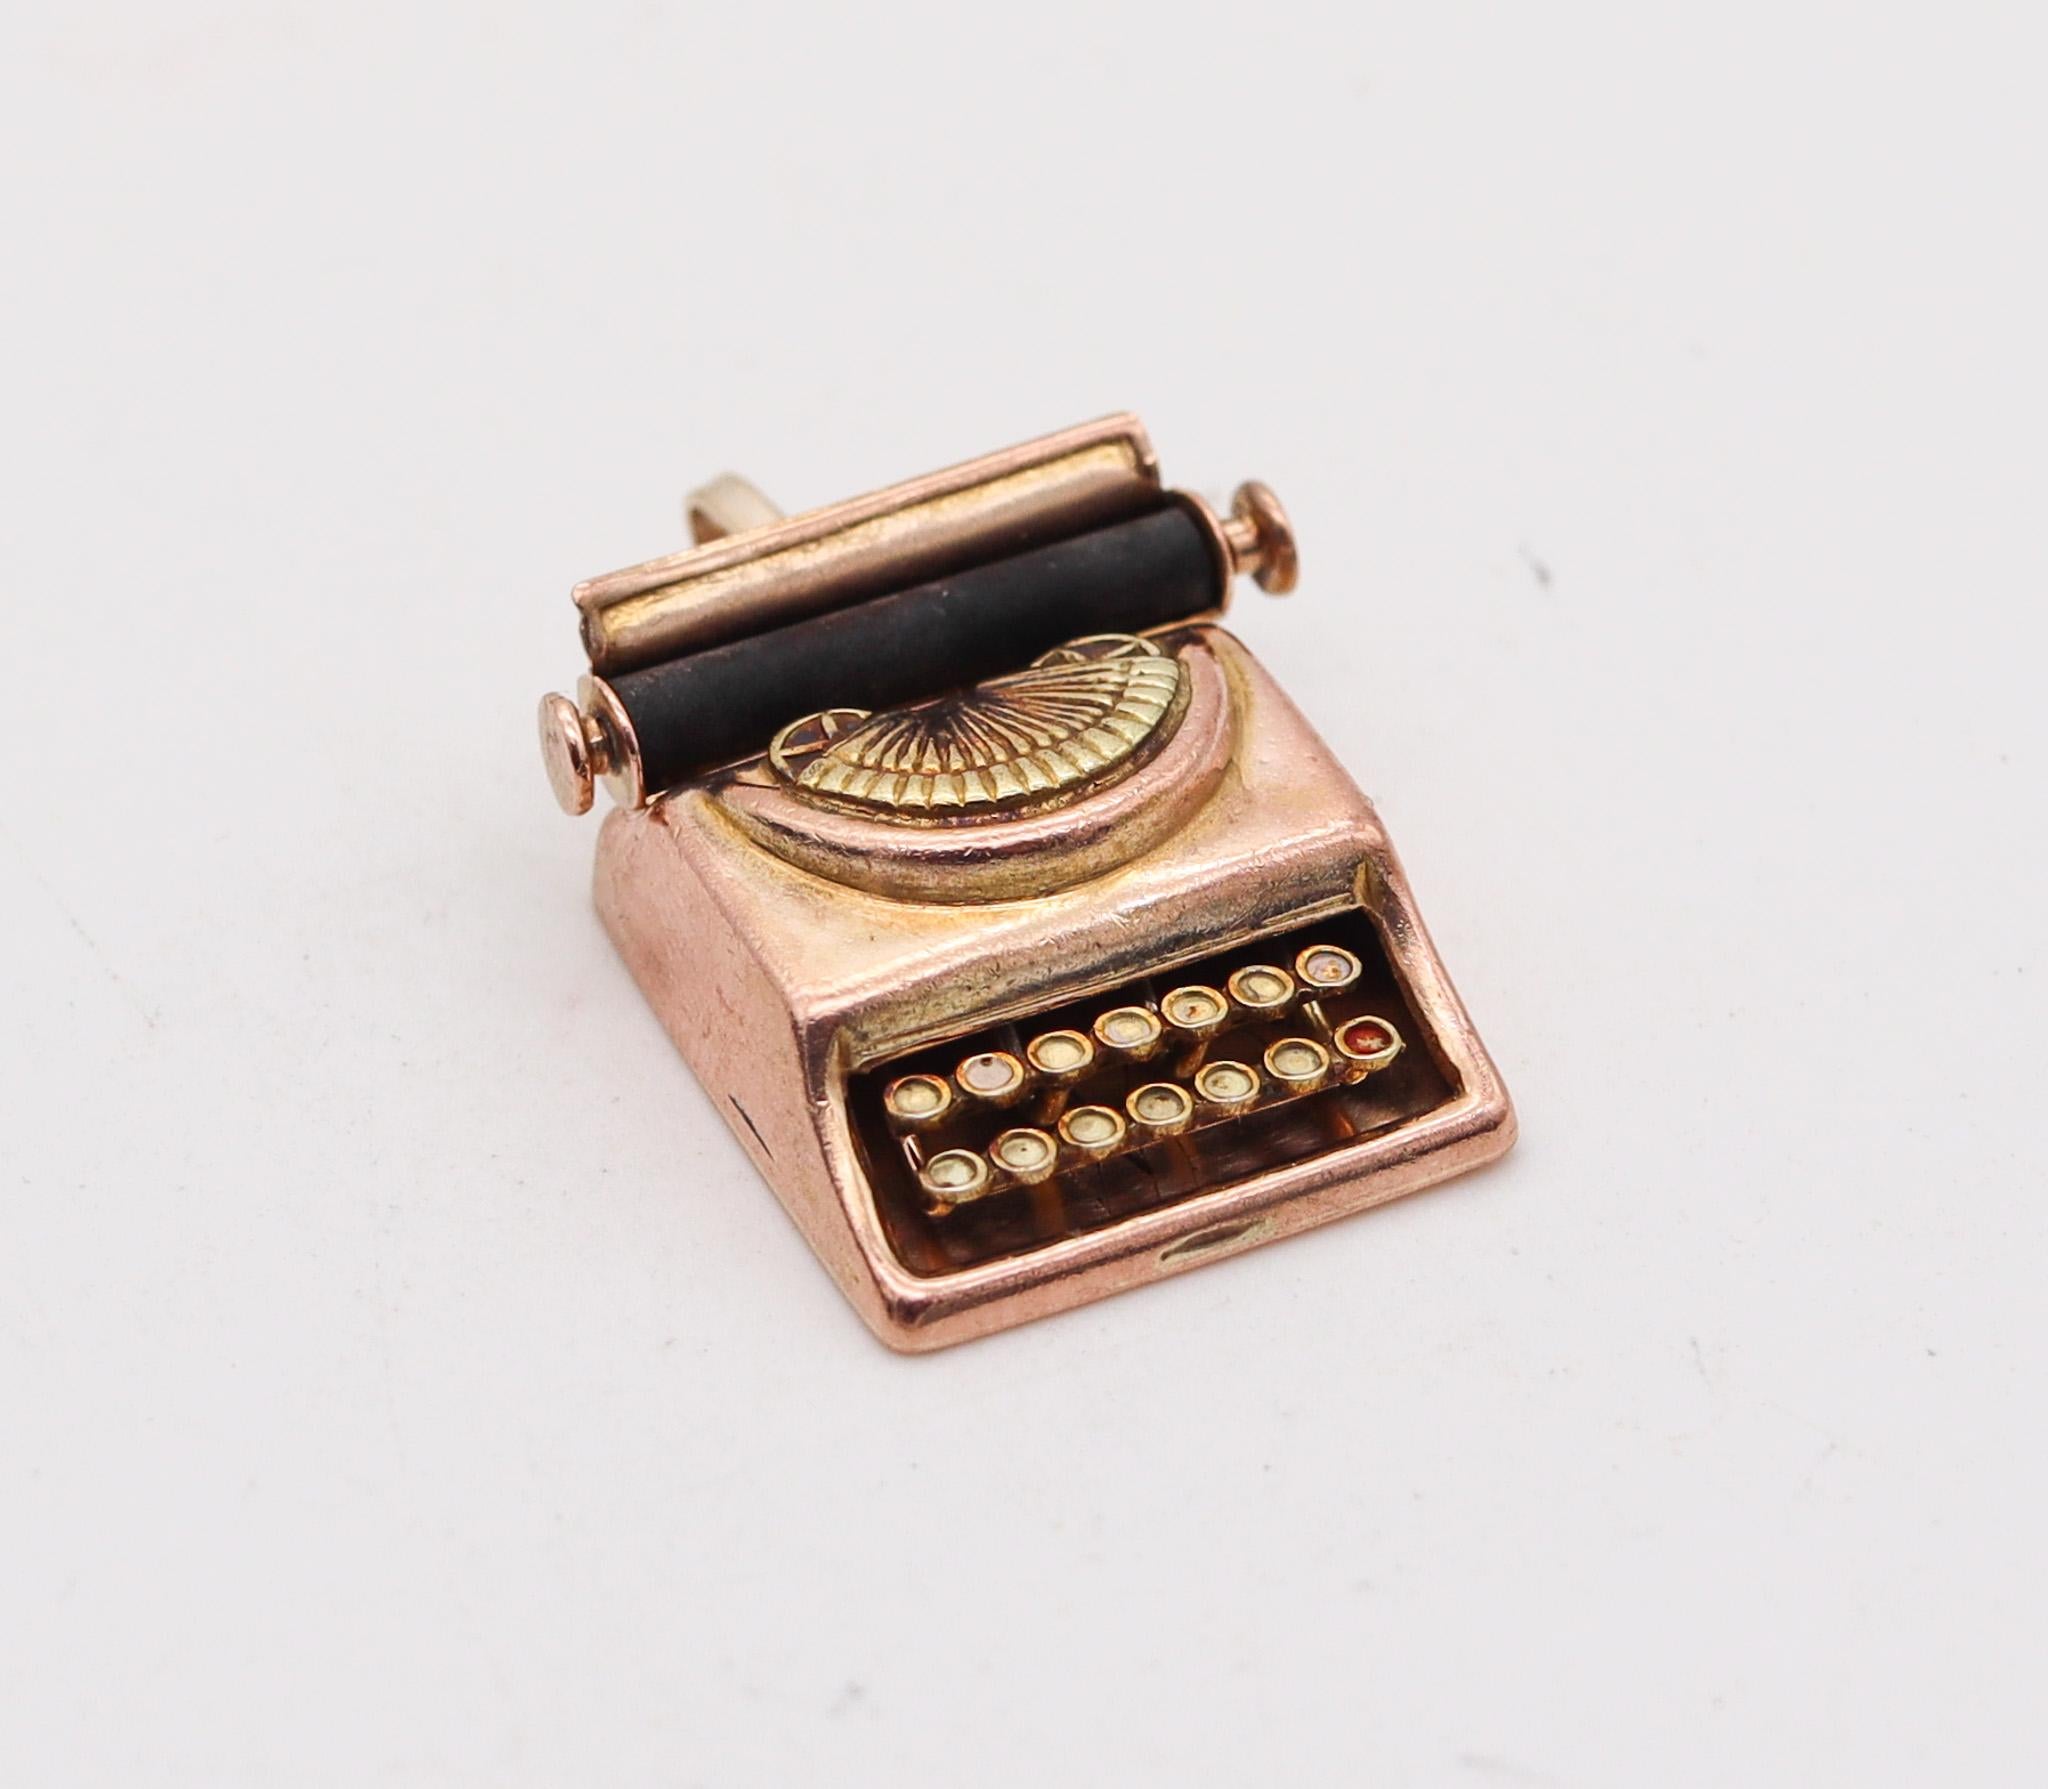 An antique typewriting machine pendant-charm.

Beautiful and very well detailed pendant-charm made in the shape of an early typewriting machine. The charm was created during the art deco period back in the 1930's with very nice movable details such